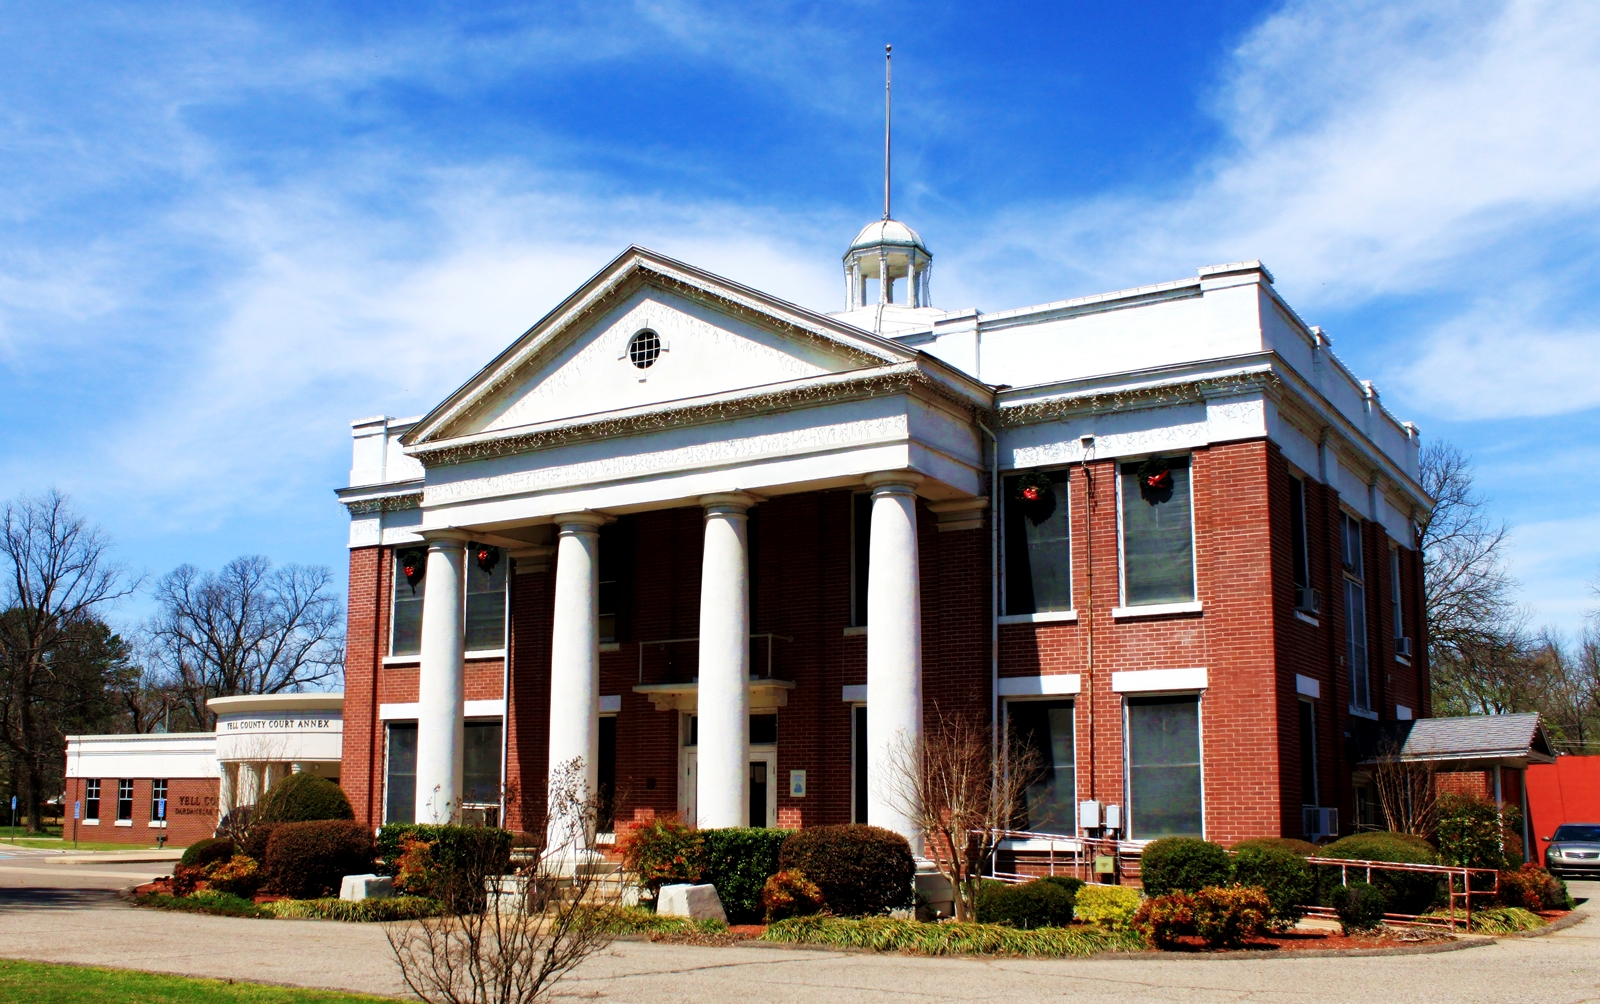 Yell County Courthouse - Dardanelle, Arkansas